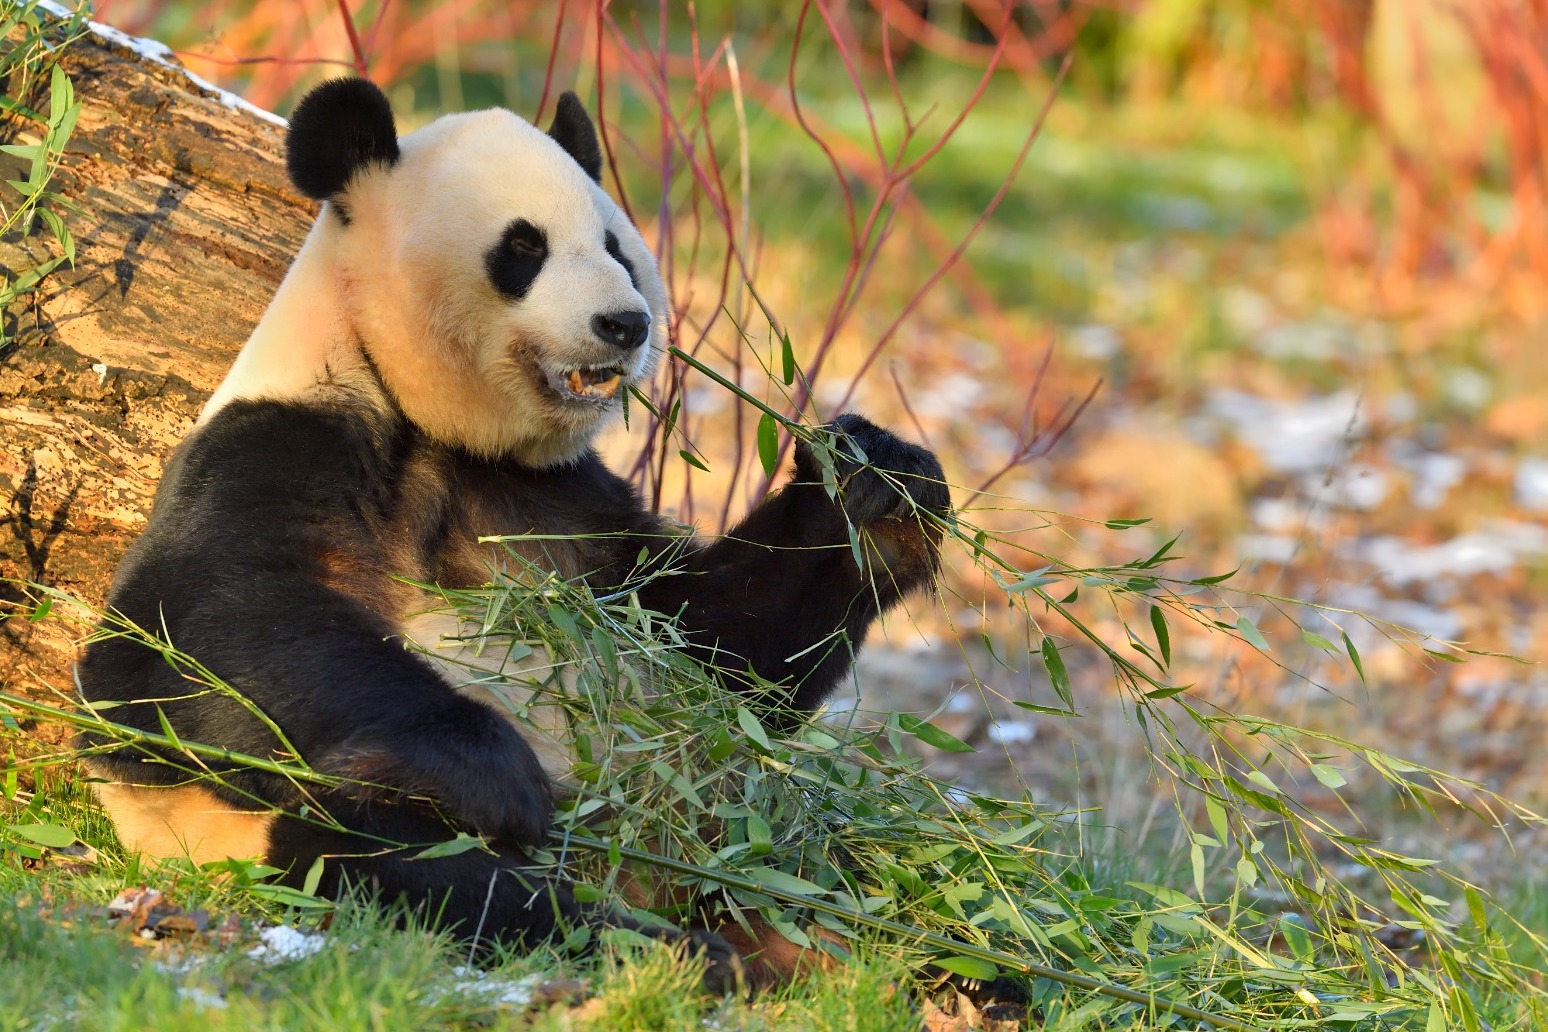 Animal lovers have two weeks left to see giant pandas before they leave UK 